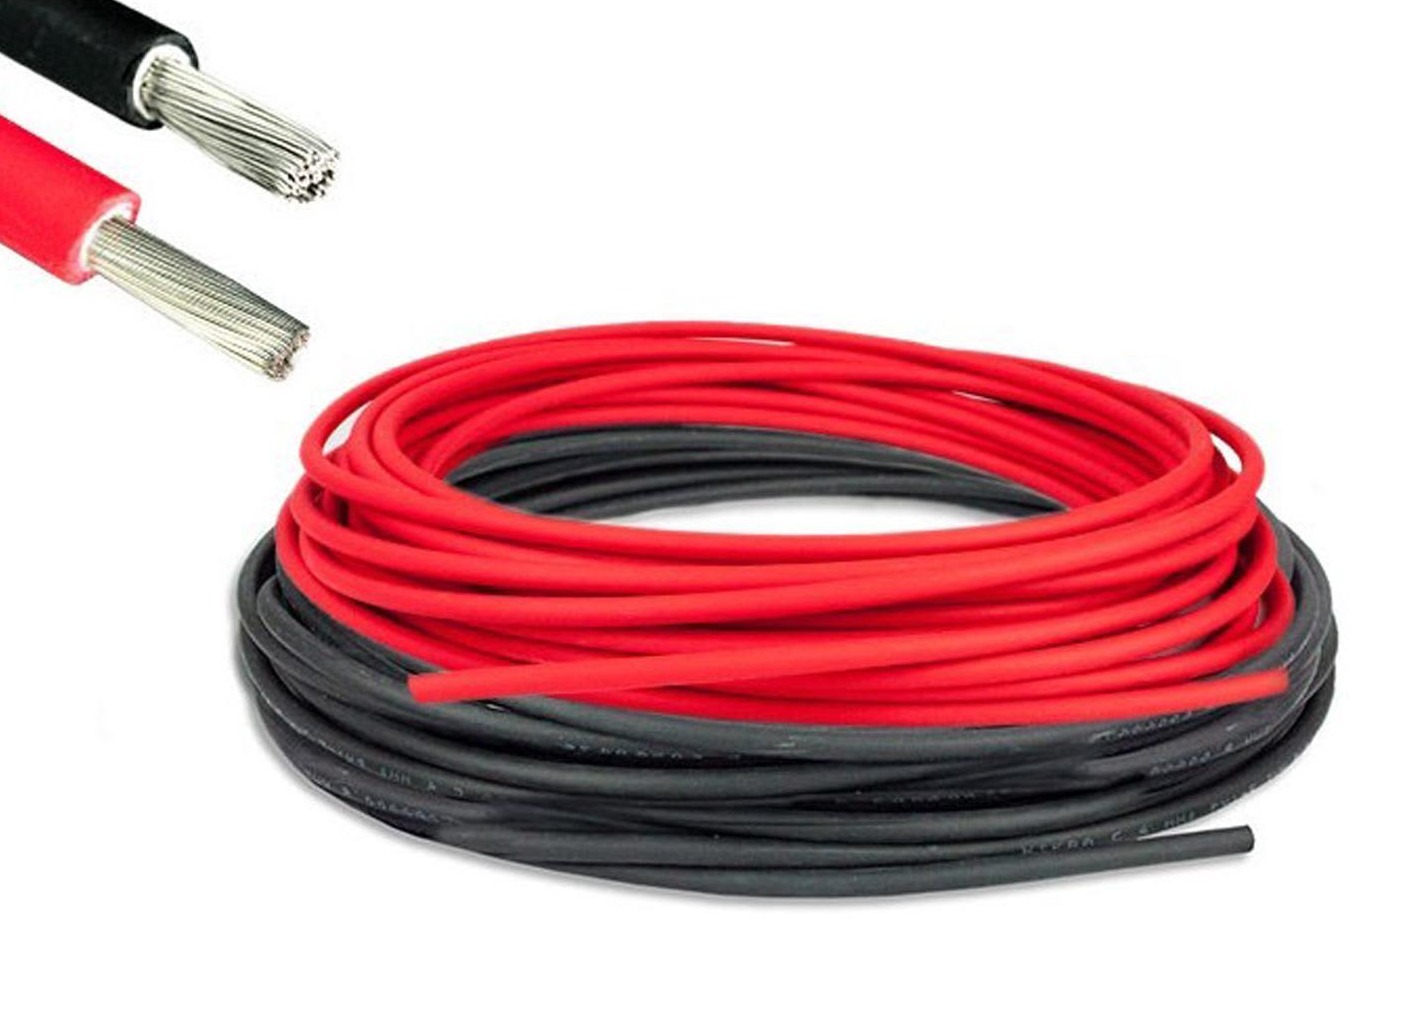 Kenbrook Solar 6mm DC Wire 20 Meters (10M Red + 10M Black) (Wire Only)